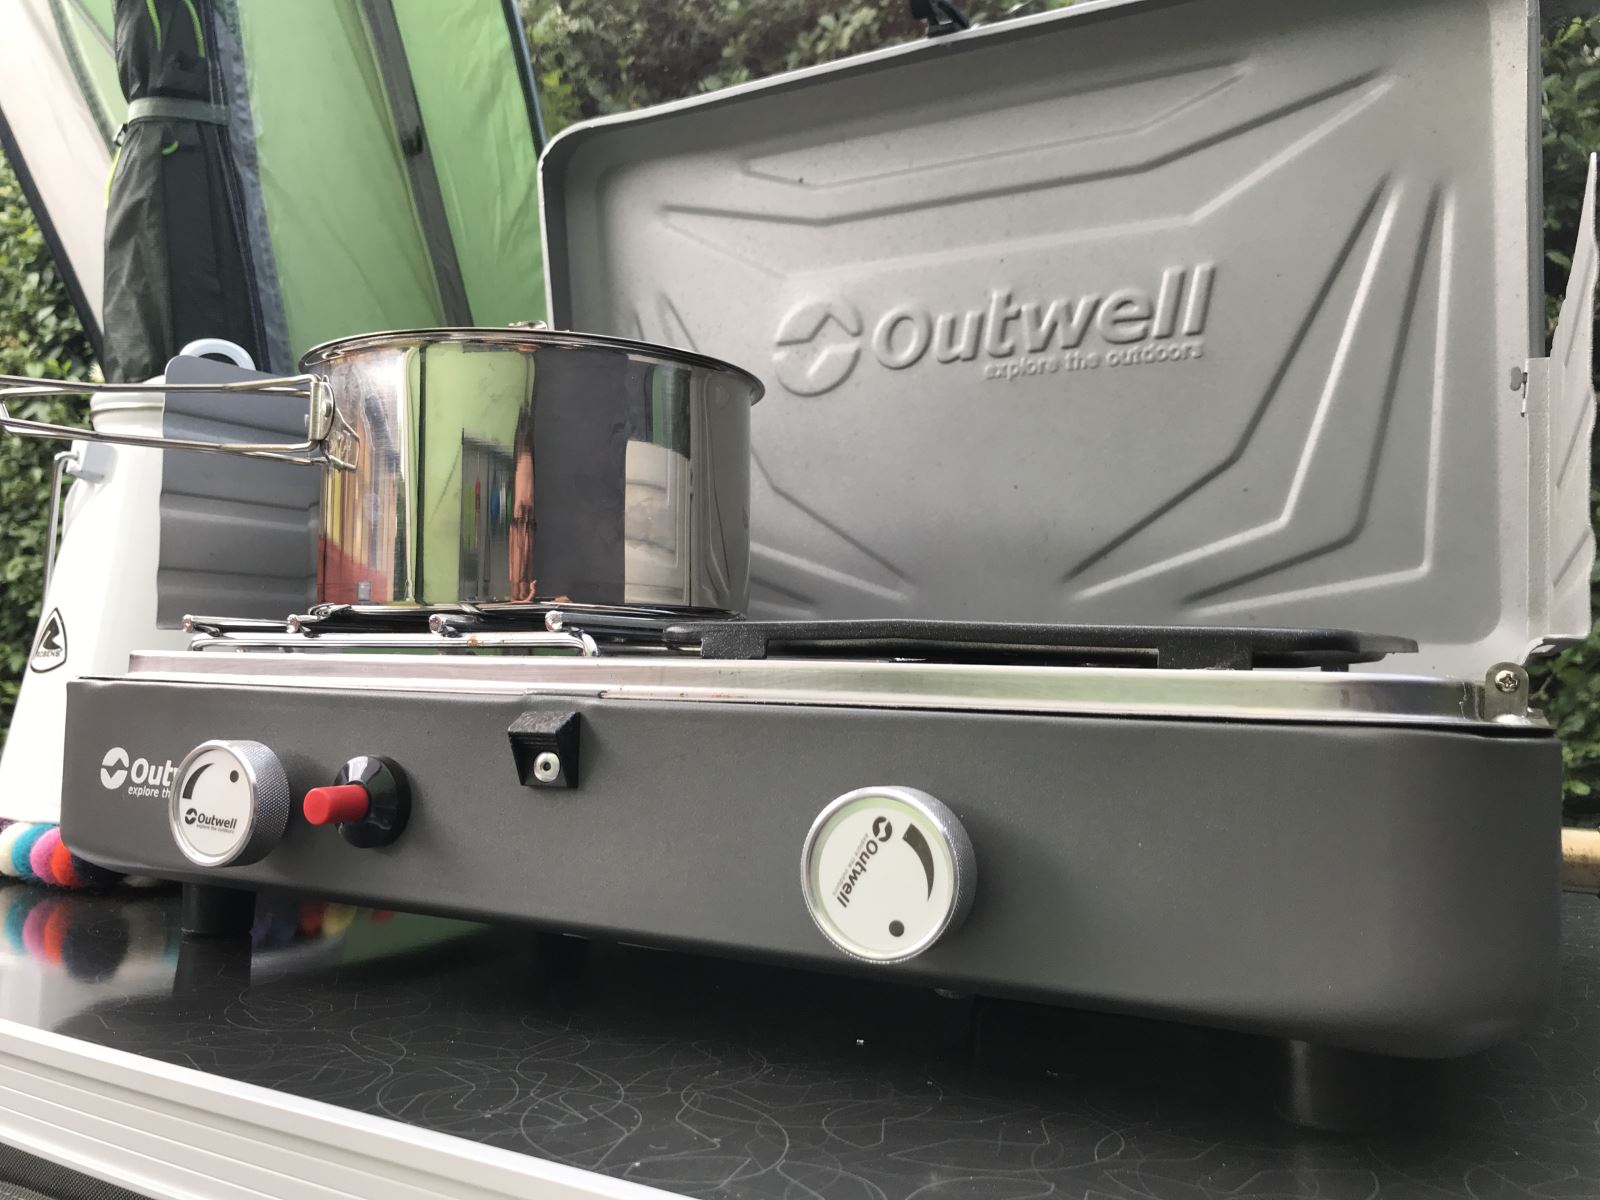 Outwell double burner stove